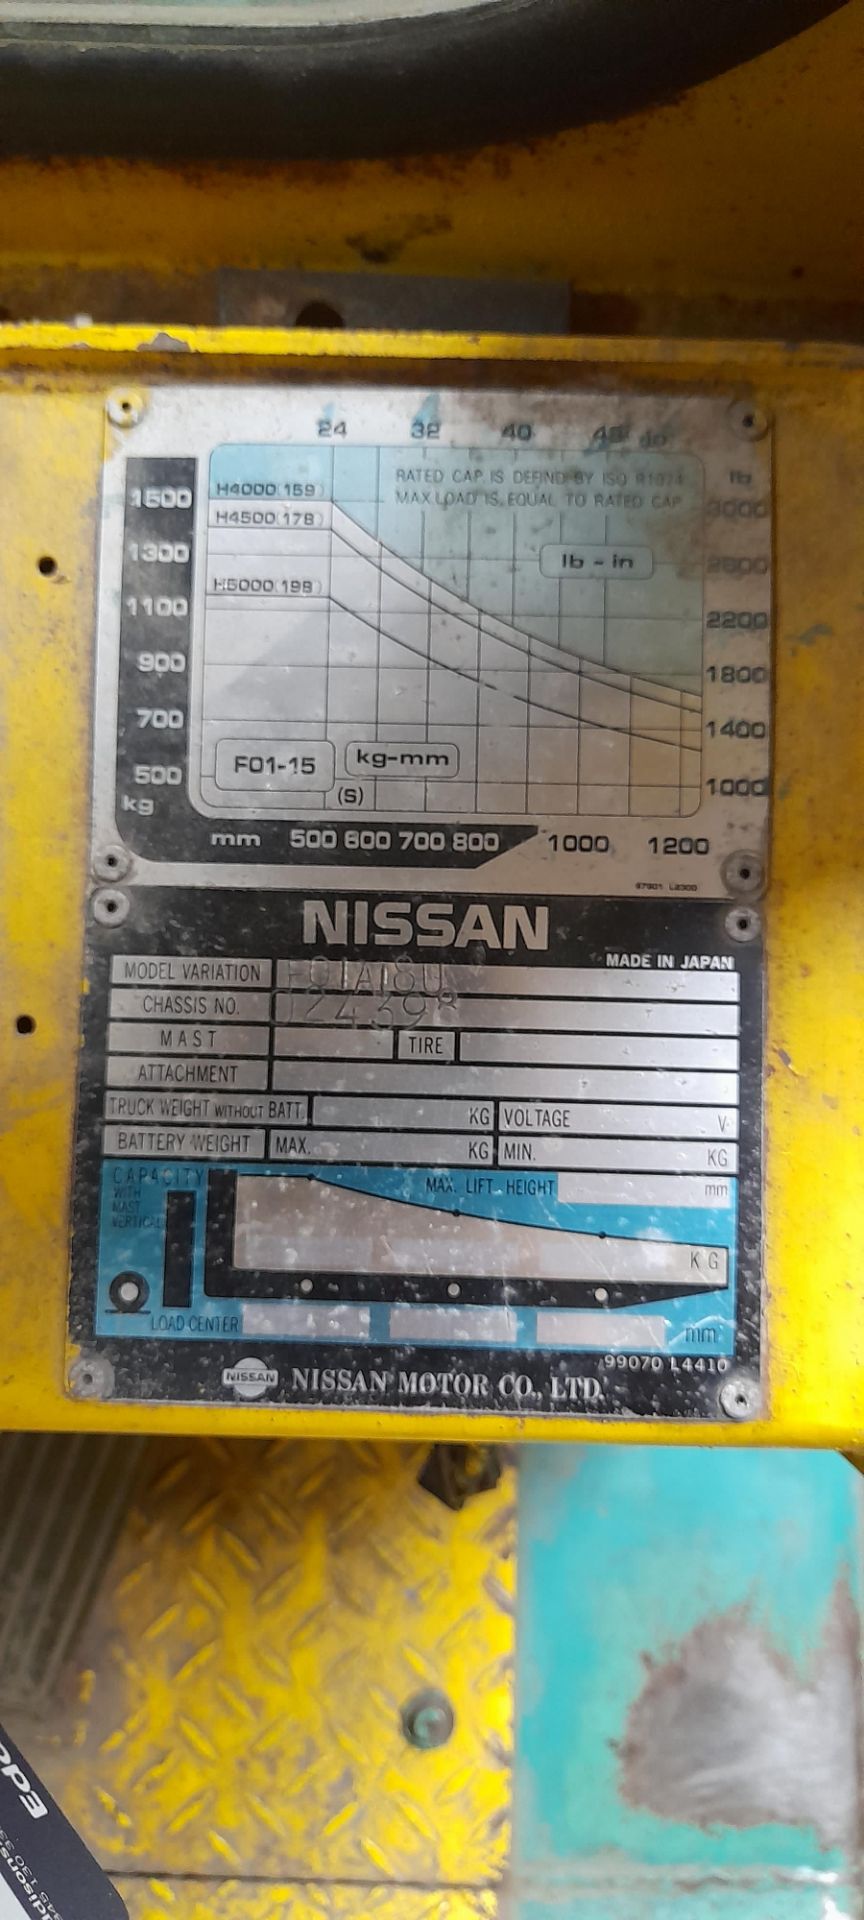 Nissan FO1A1811 LPG Forklift, Chassis 024398, 1166 Hours - Image 4 of 6